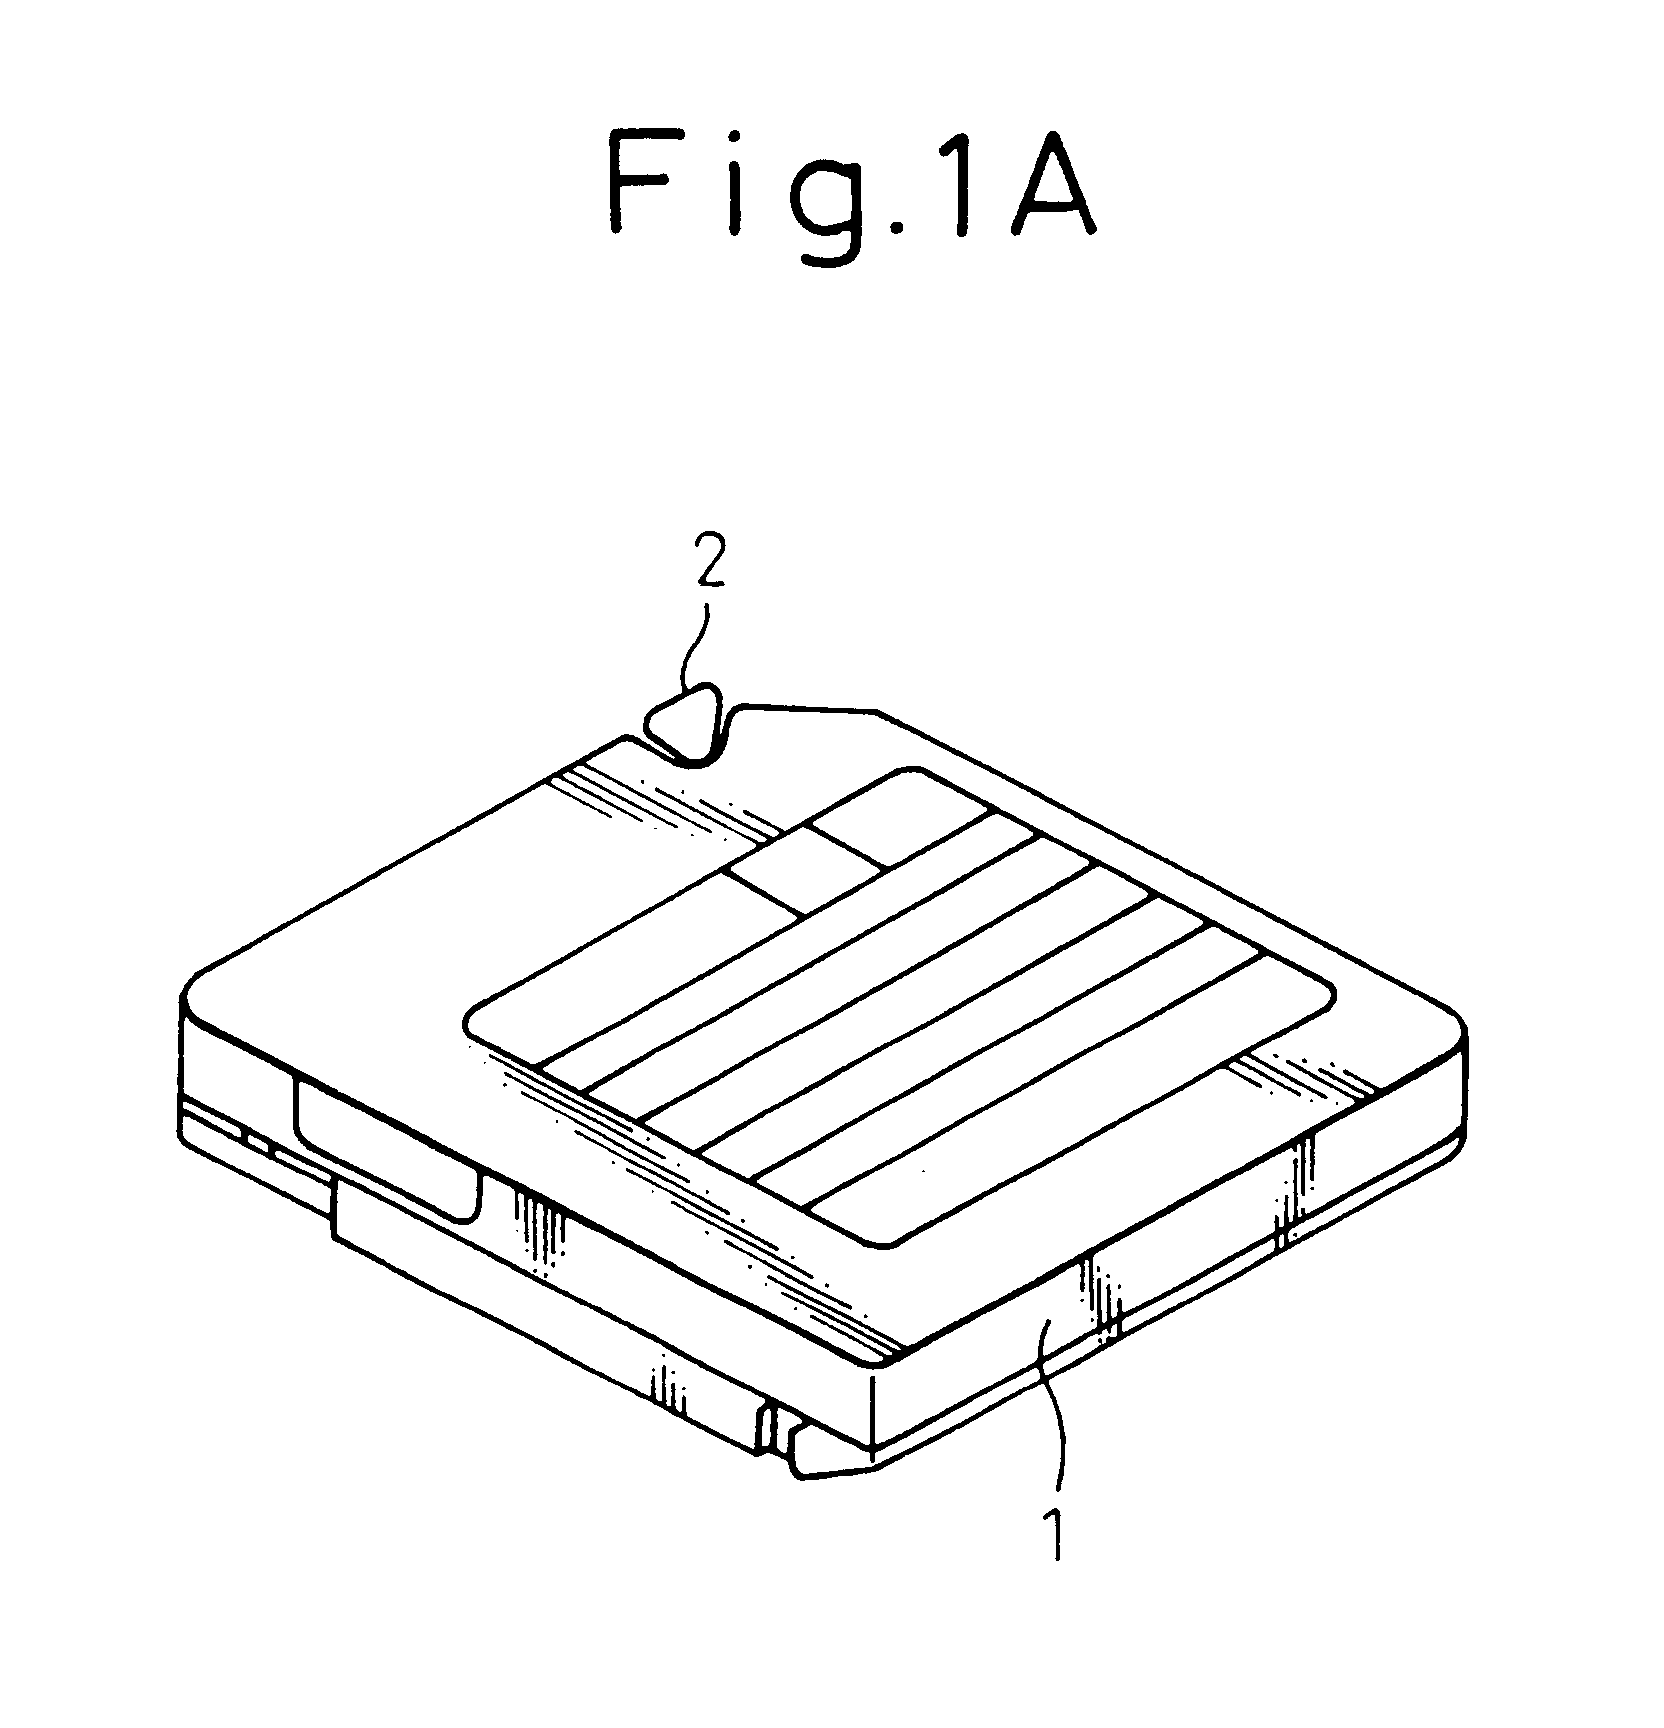 Apparatus for automatically conveying cartridges